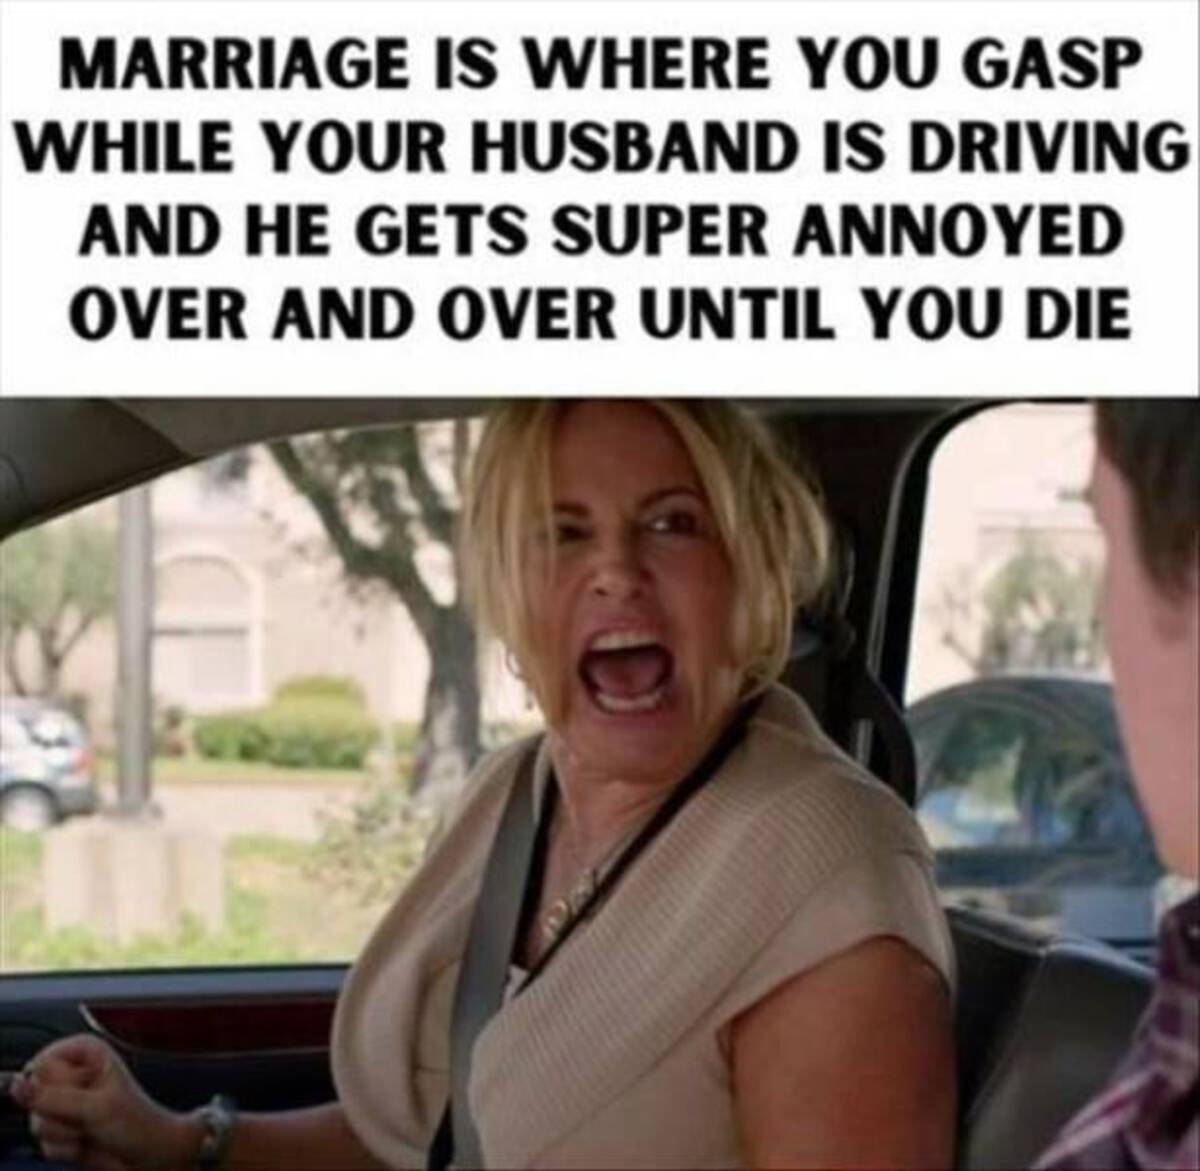 photo caption - Marriage Is Where You Gasp While Your Husband Is Driving And He Gets Super Annoyed Over And Over Until You Die